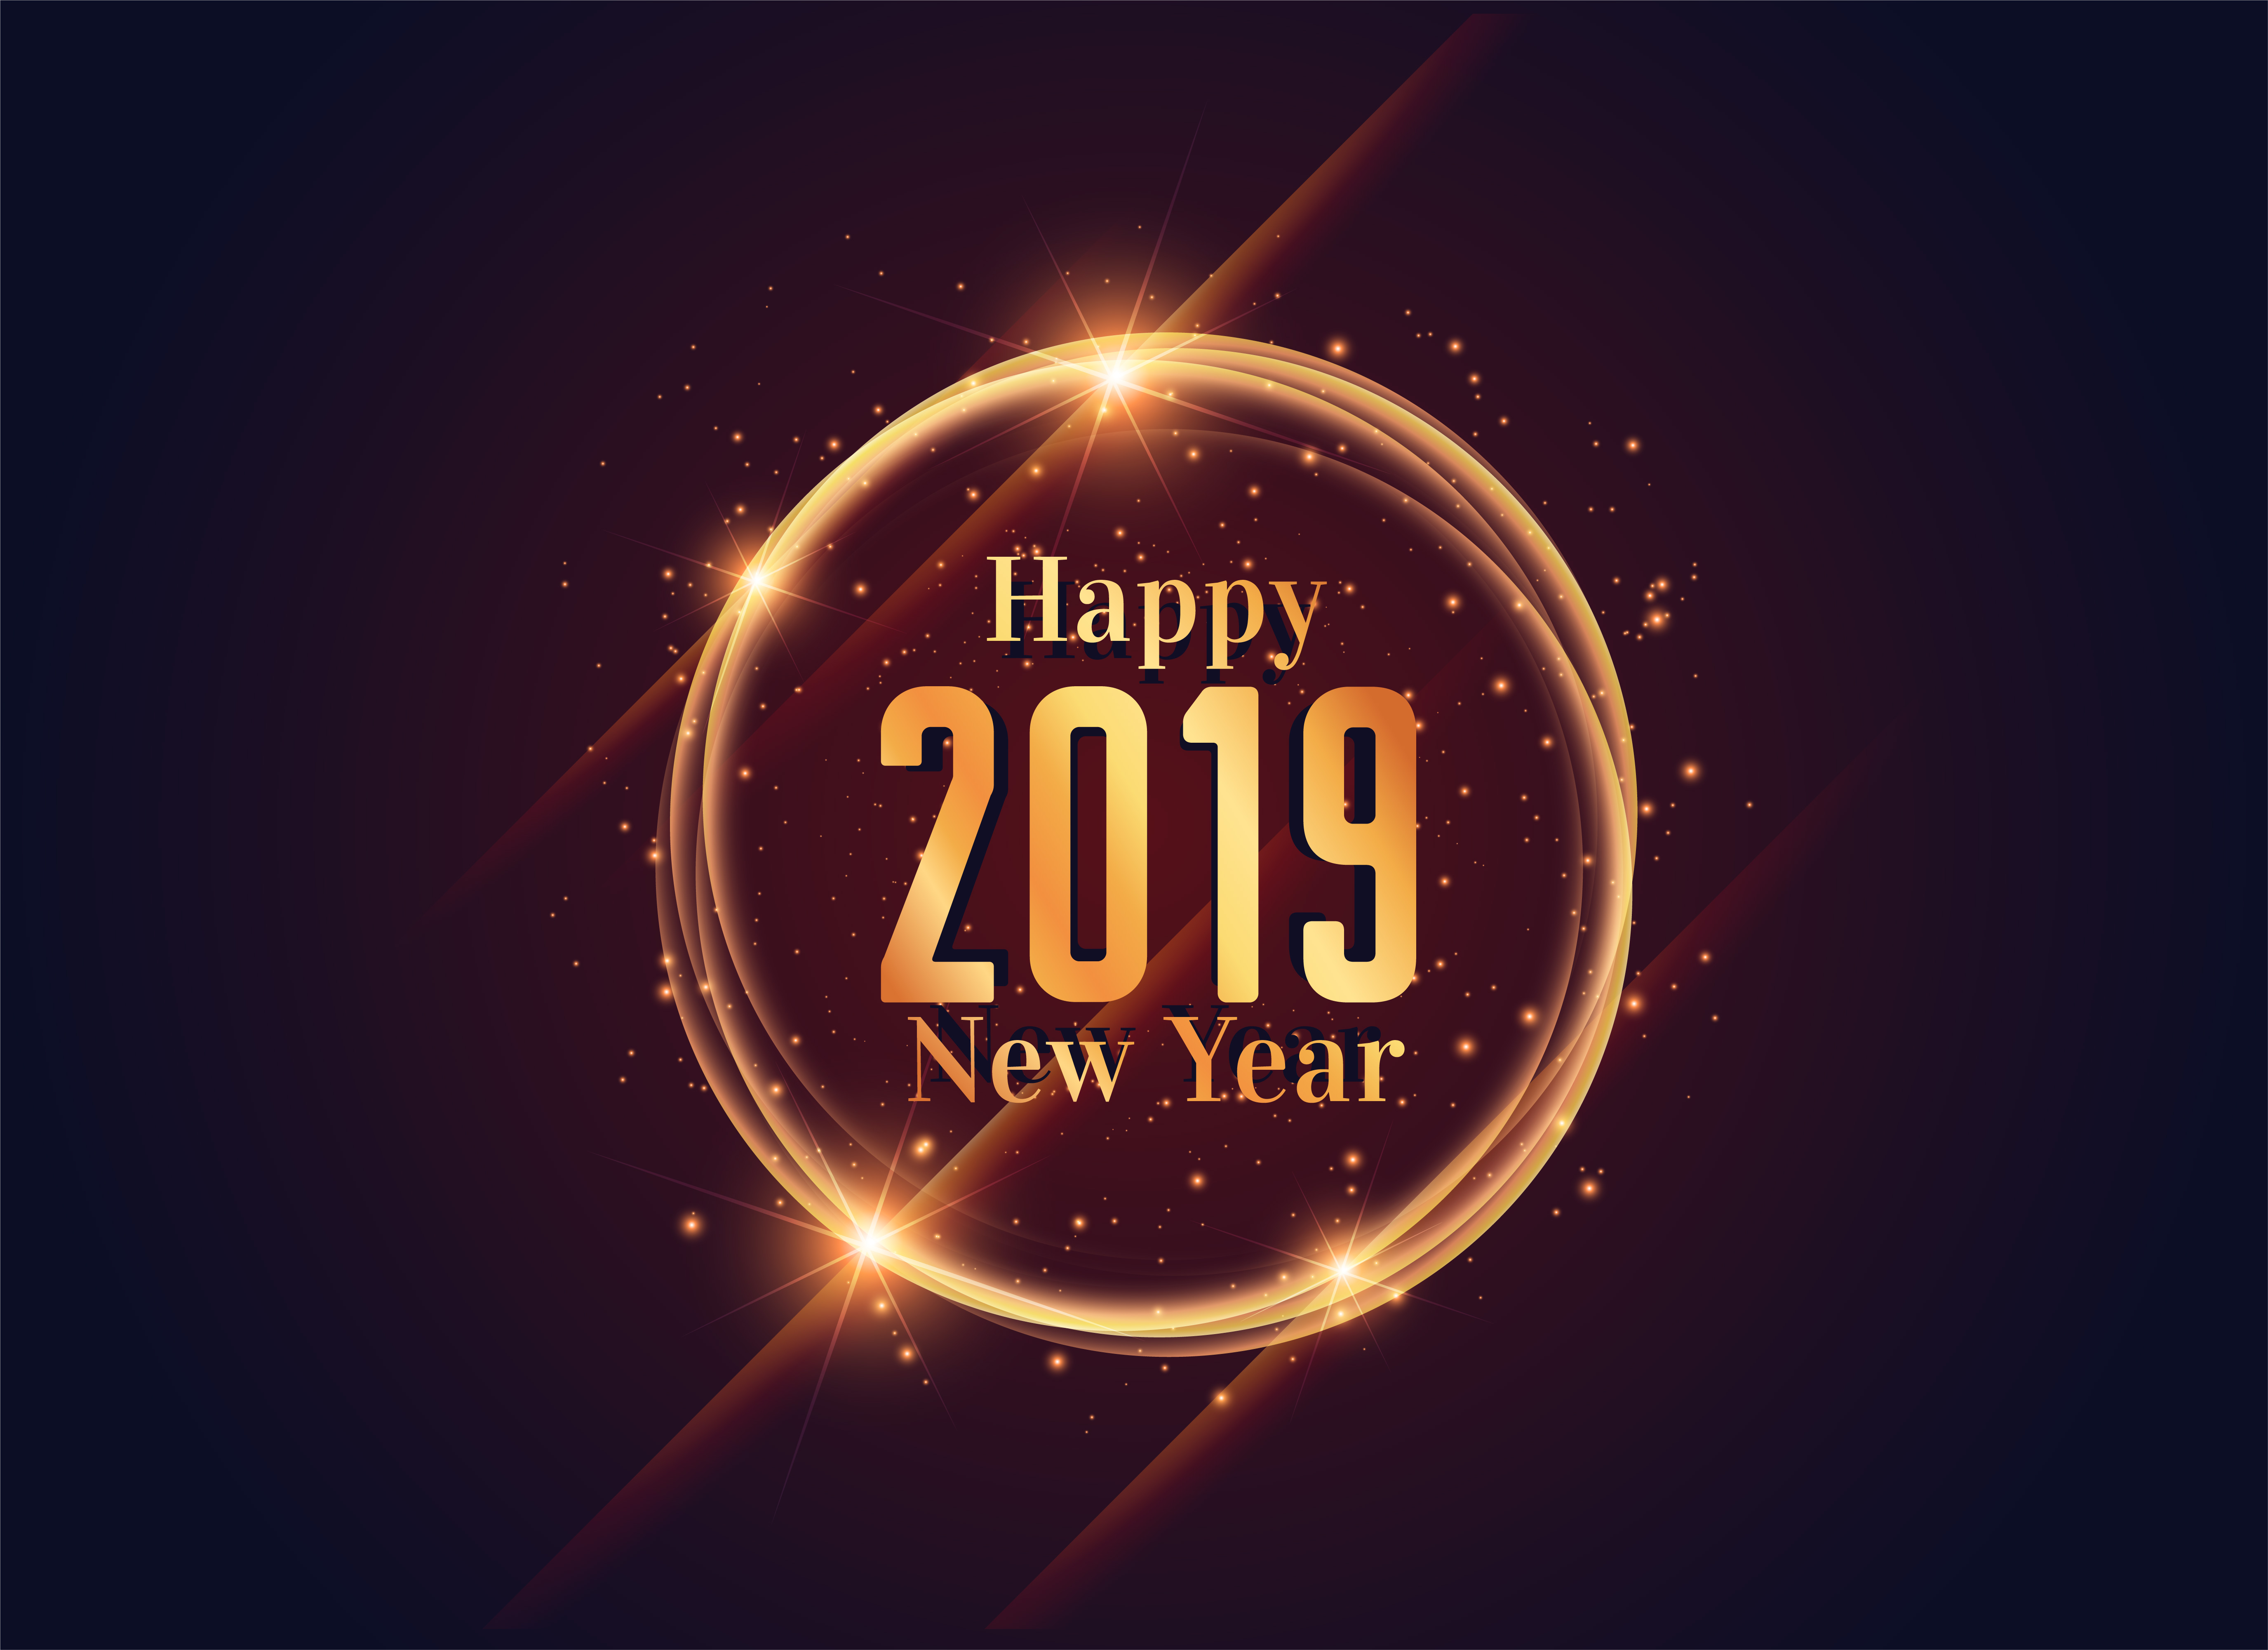 2019 happy new year shiny background design - Download Free Vector Art